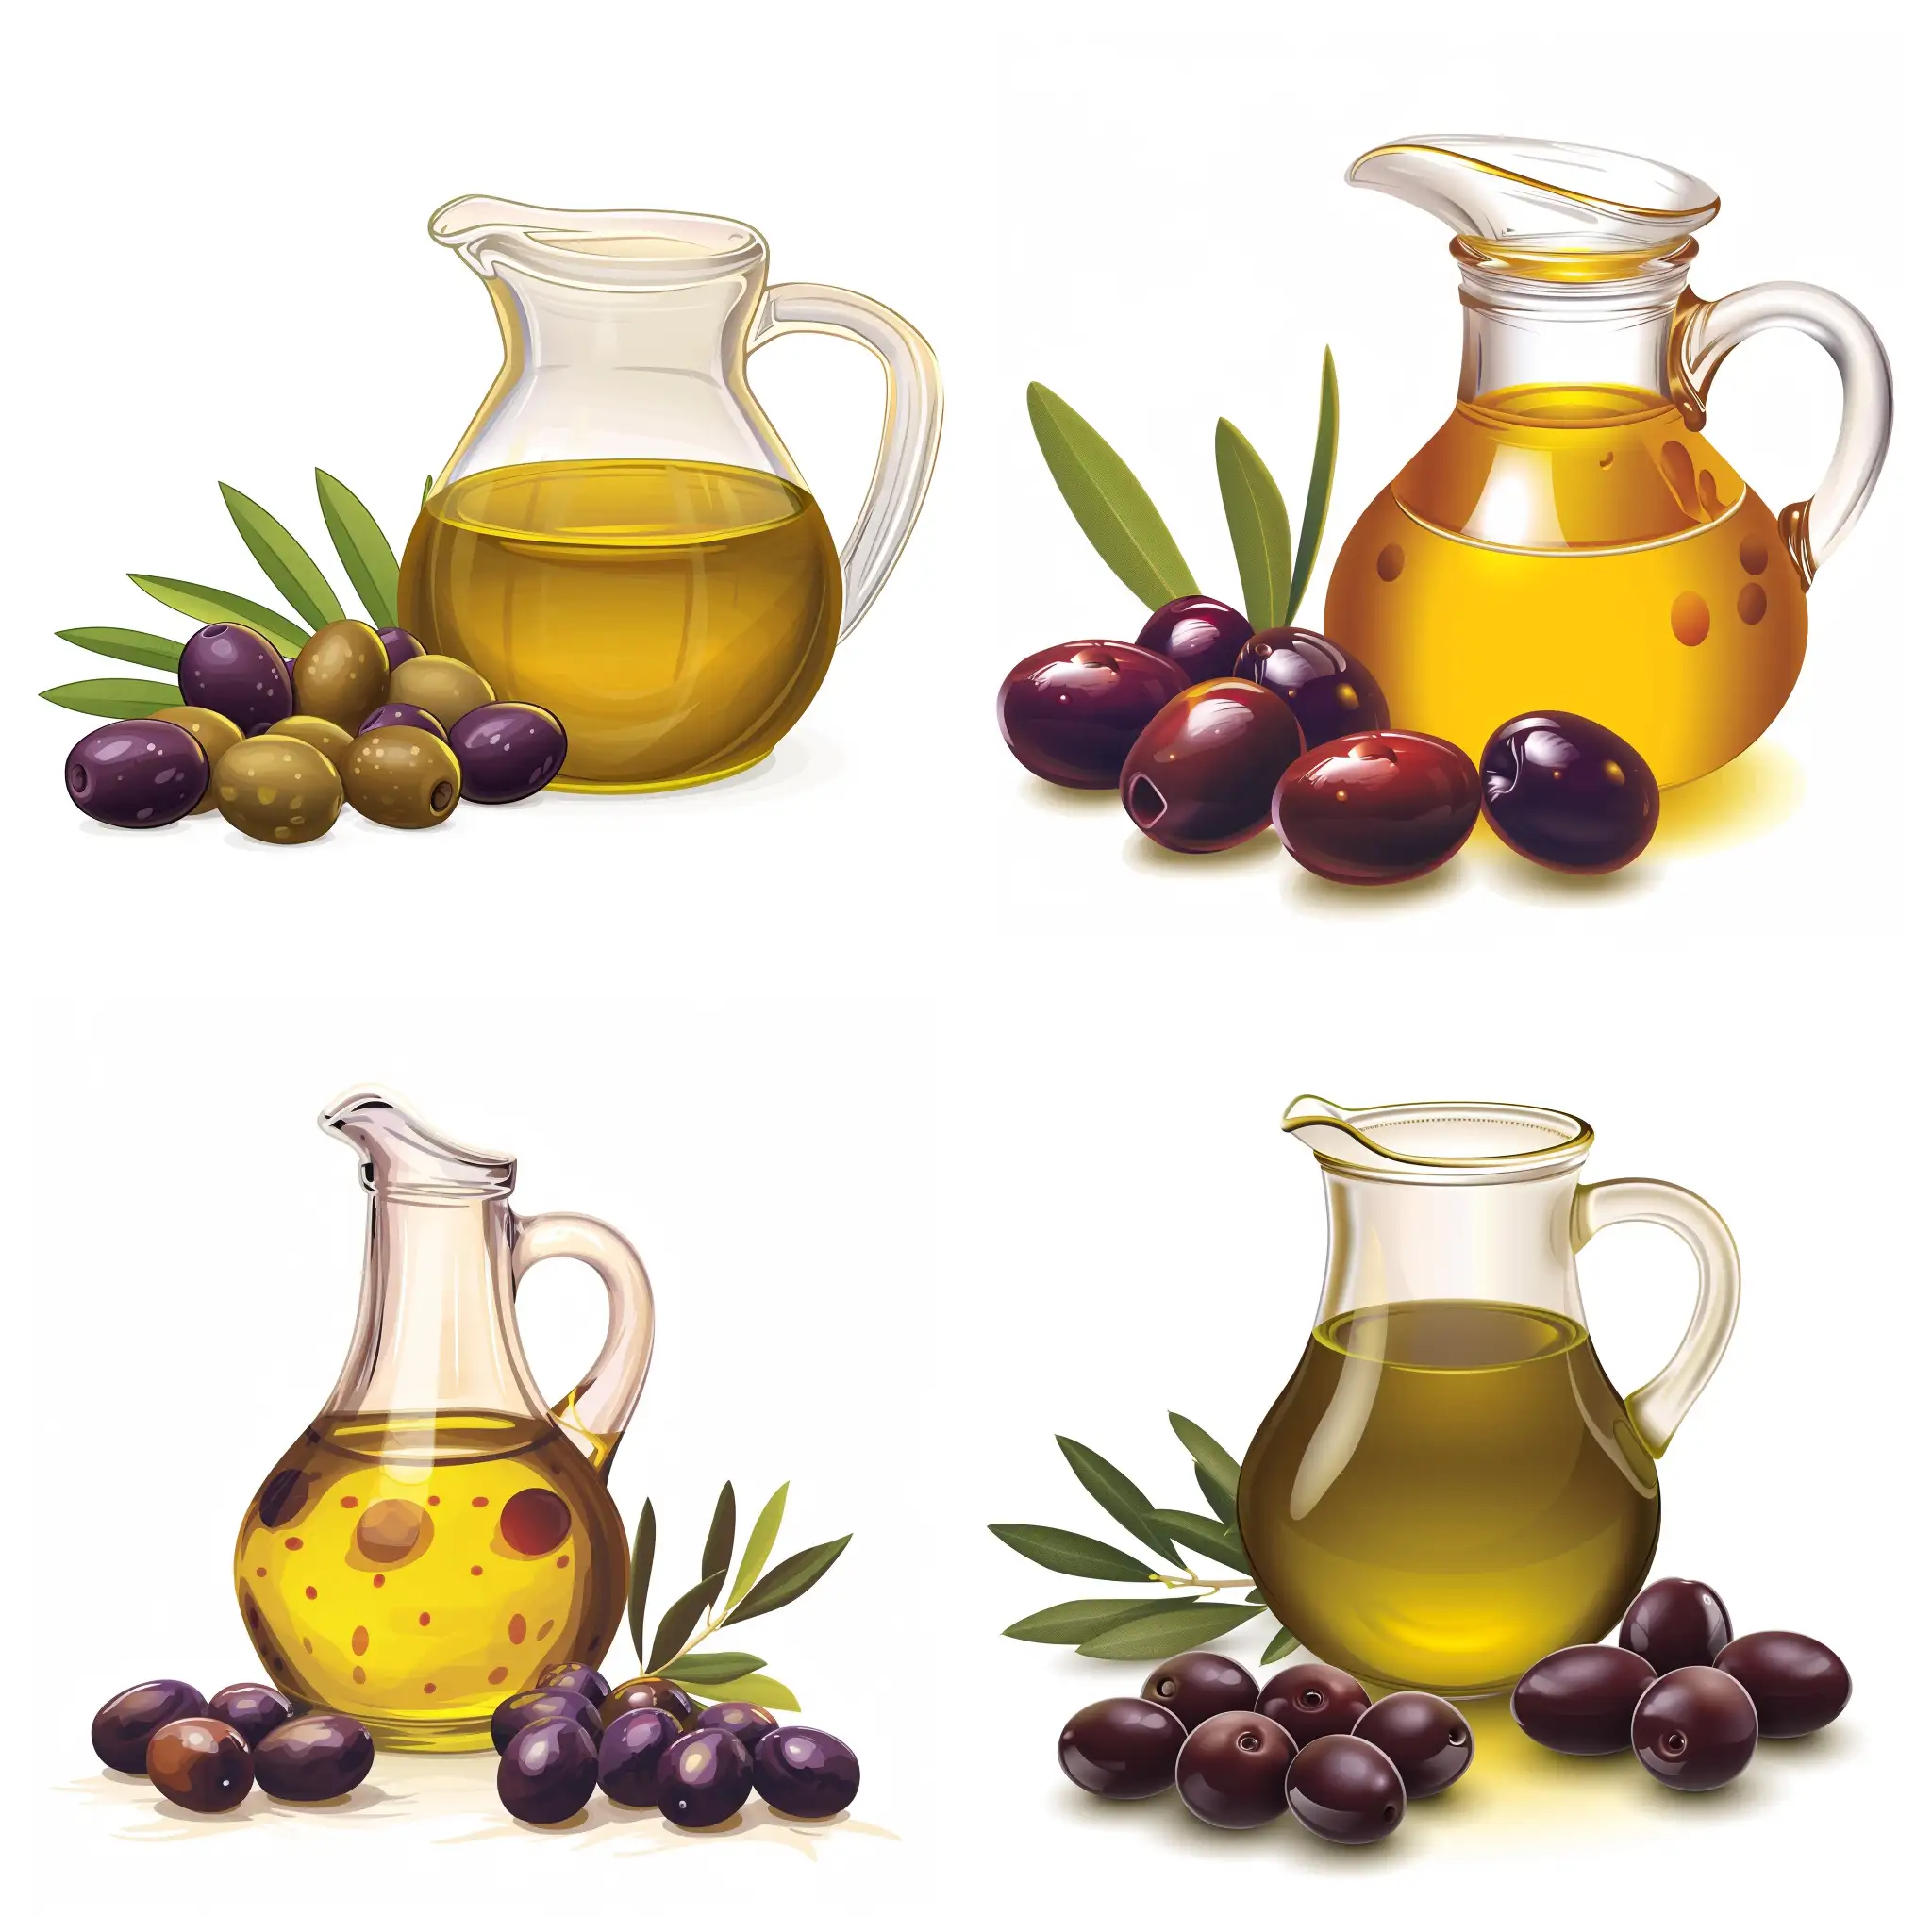 Exquisite-Olive-Oil-Jug-and-Olives-in-Vector-Style